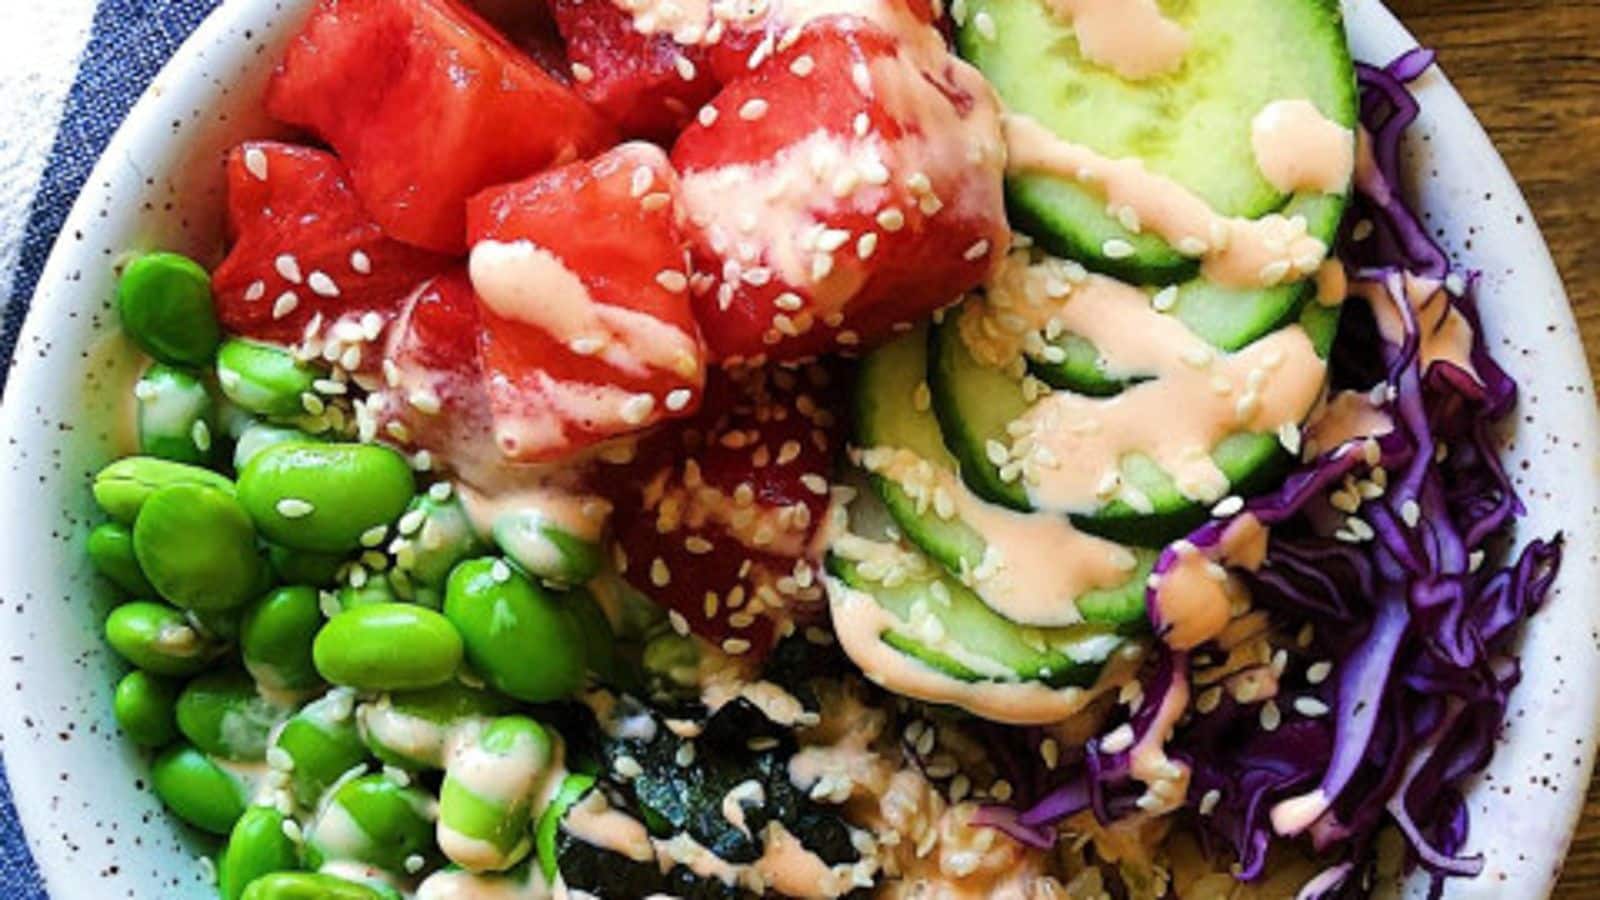 Beat the heat with this wholesome watermelon poke bowl recipe